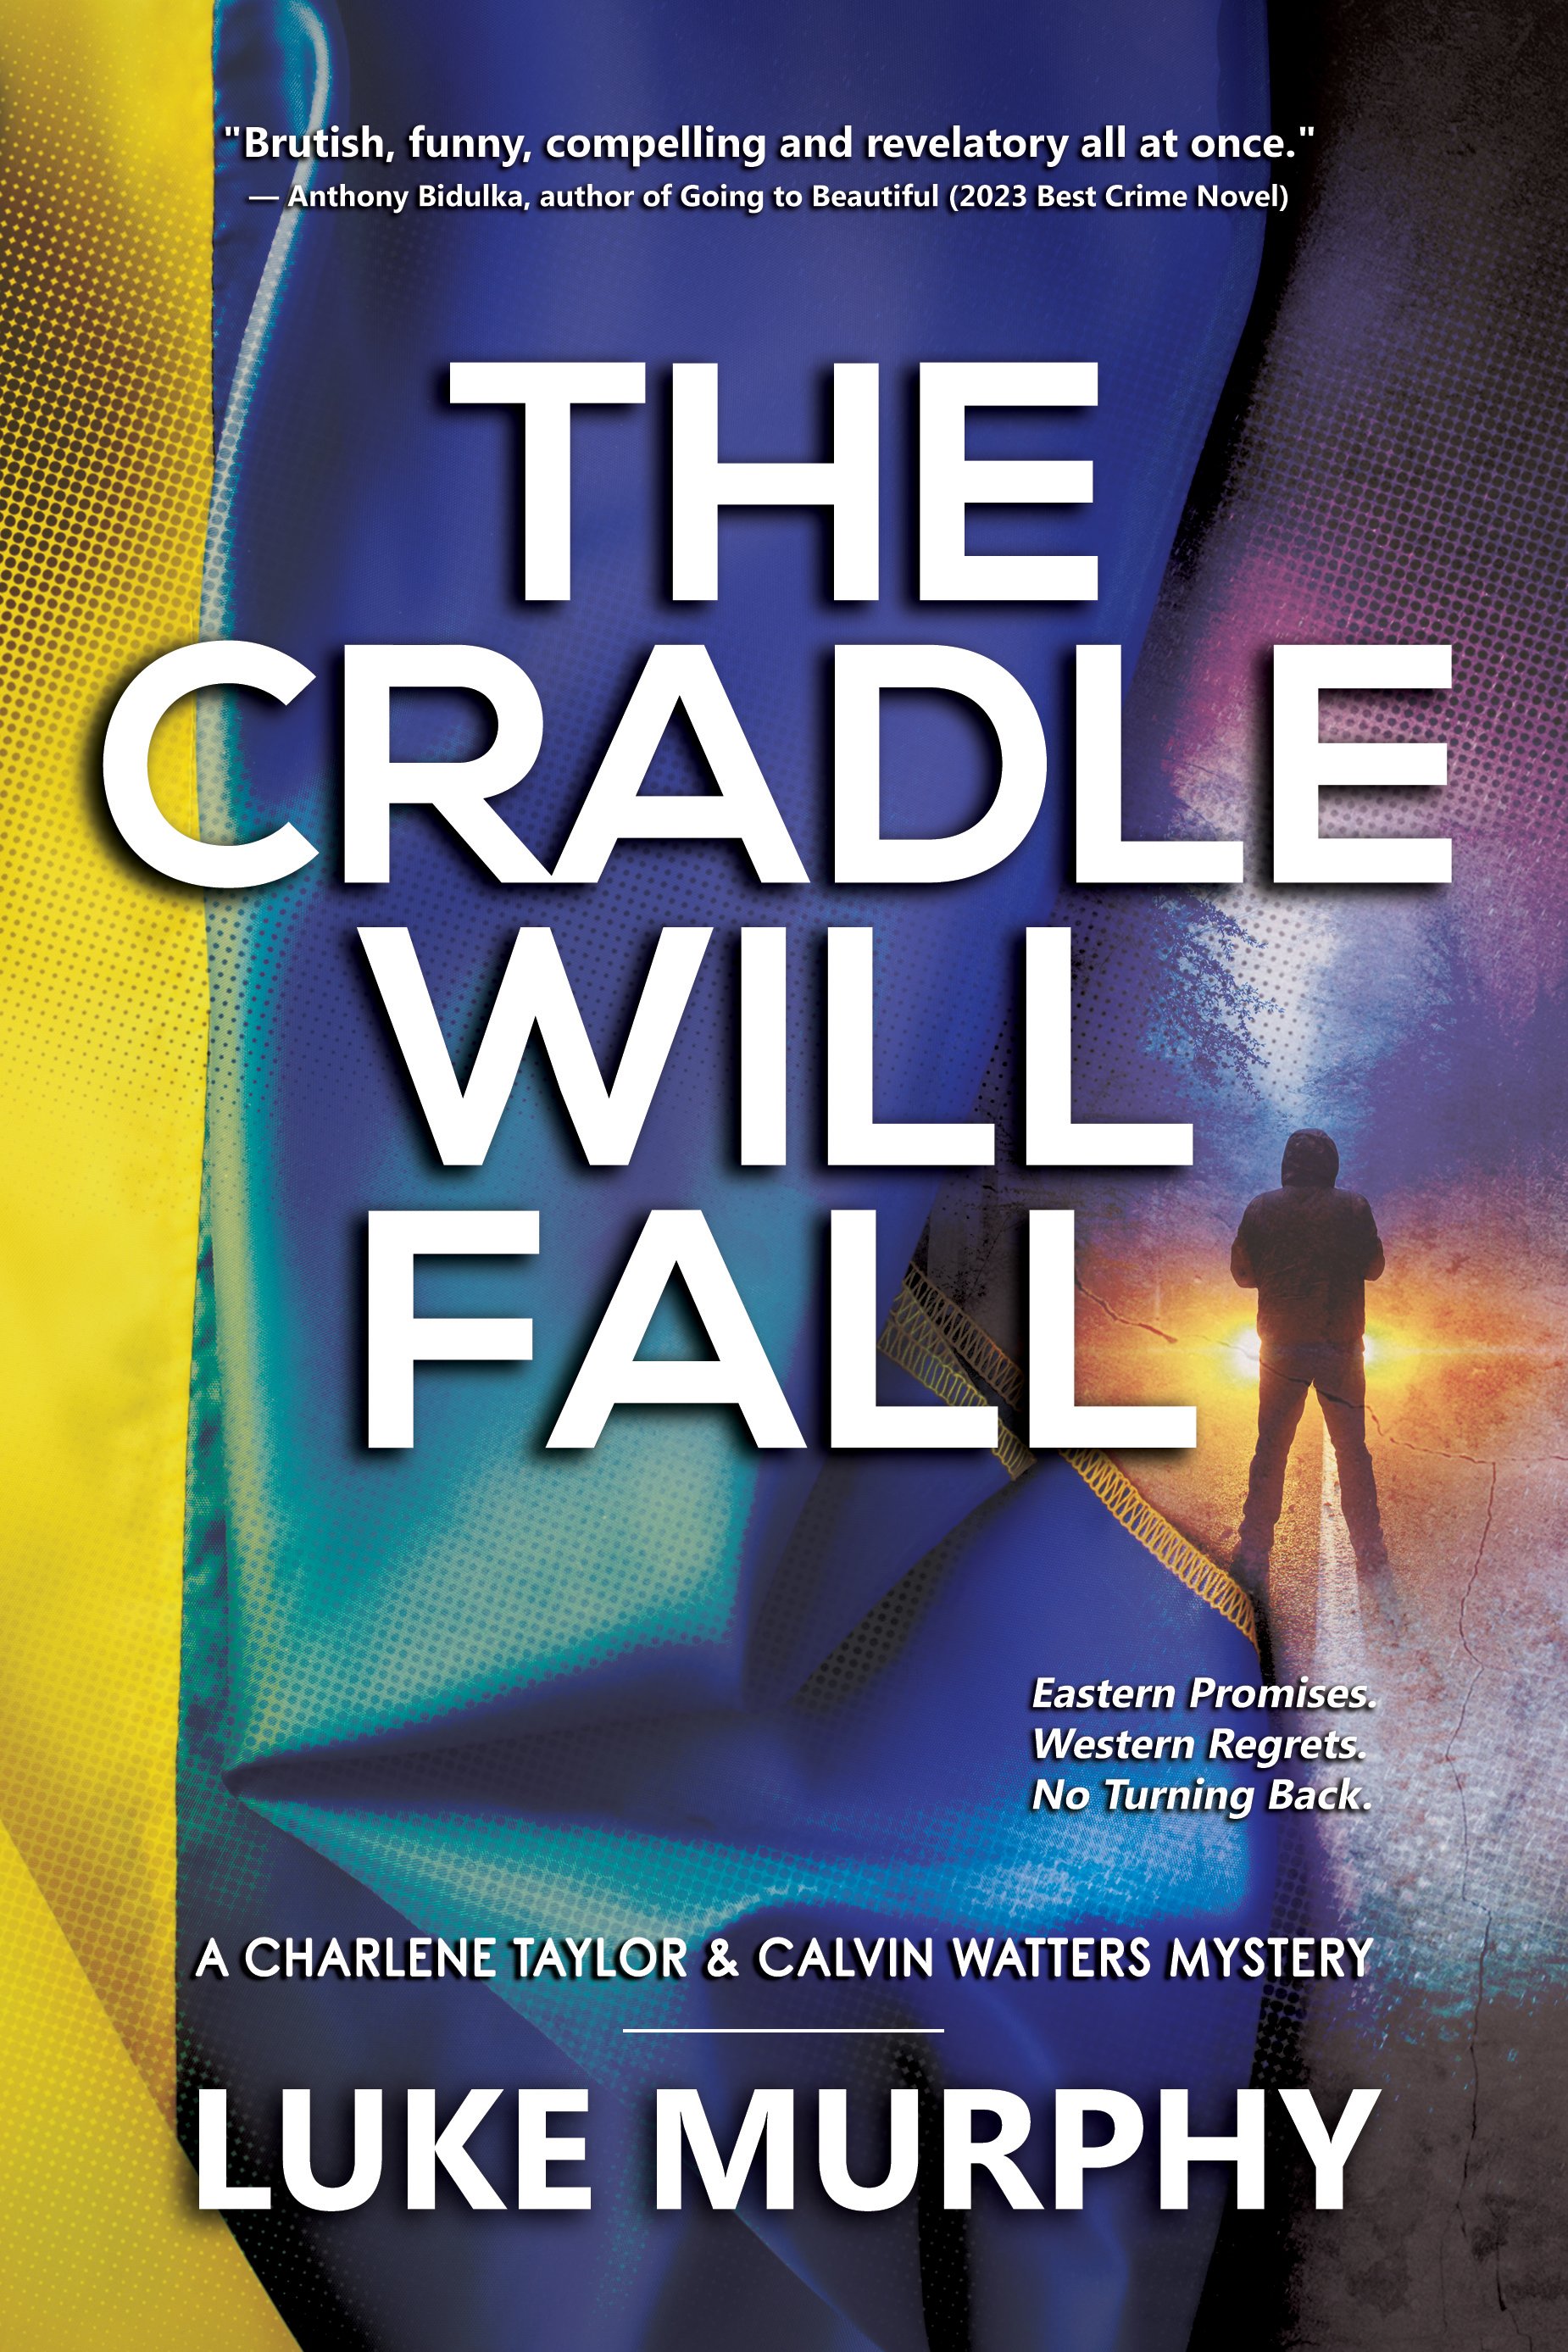 101ca Lukes Book Amazon Layout - The Cradle Will Fall - Final Front Cover (2).jpg (Copy) (Copy) (Copy) (Copy)